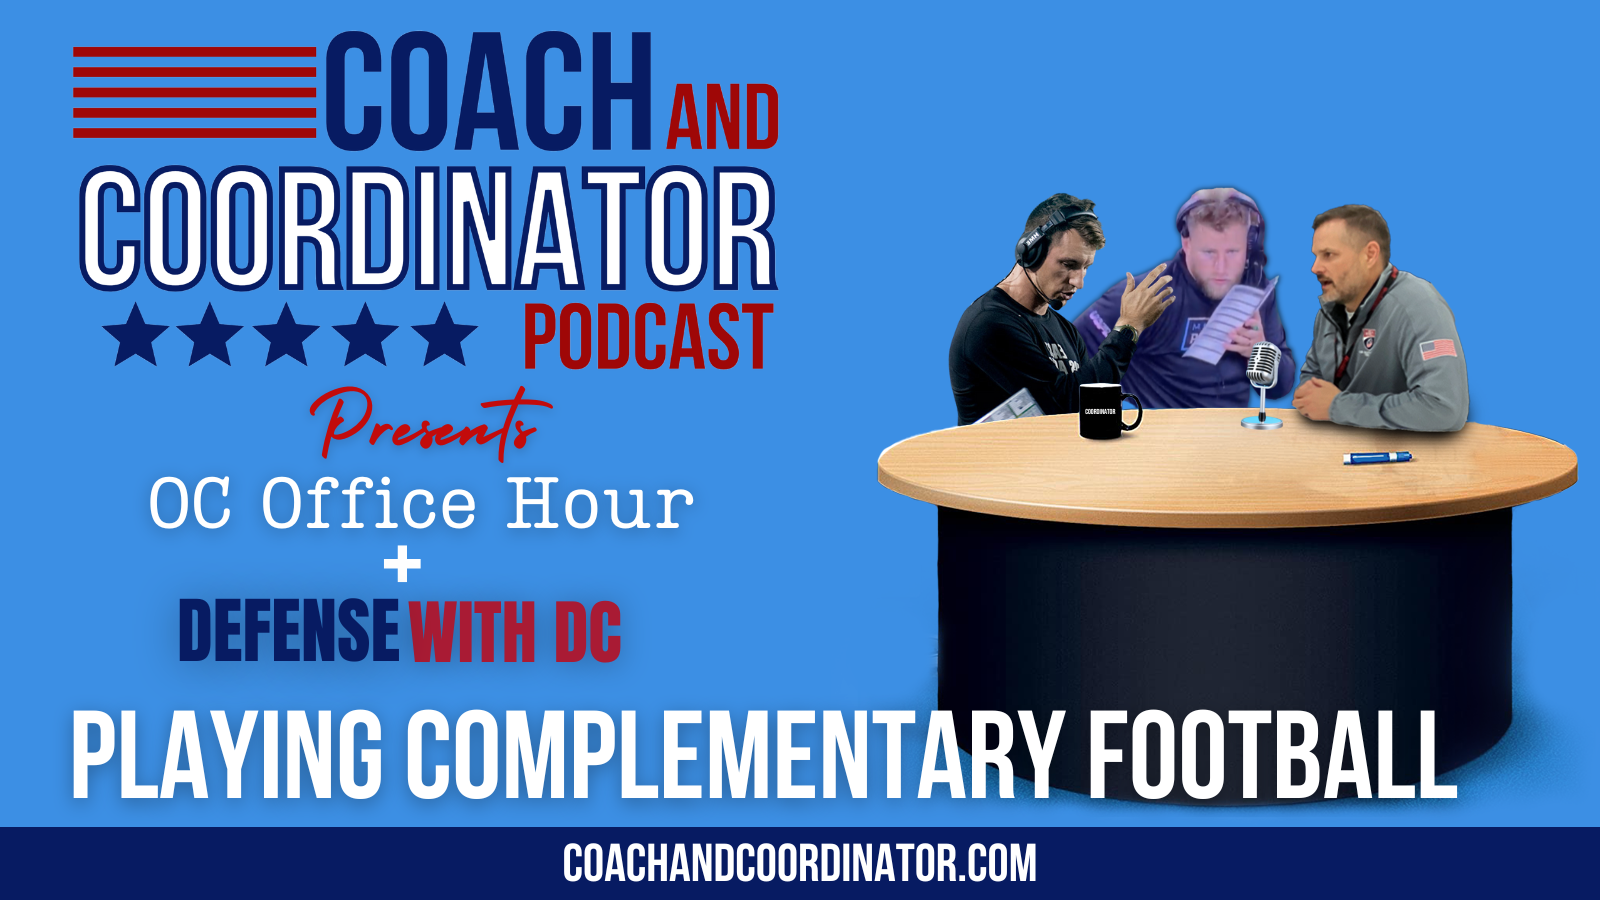 Complementary Football, Defense with DC + OC Office Hour Crossover